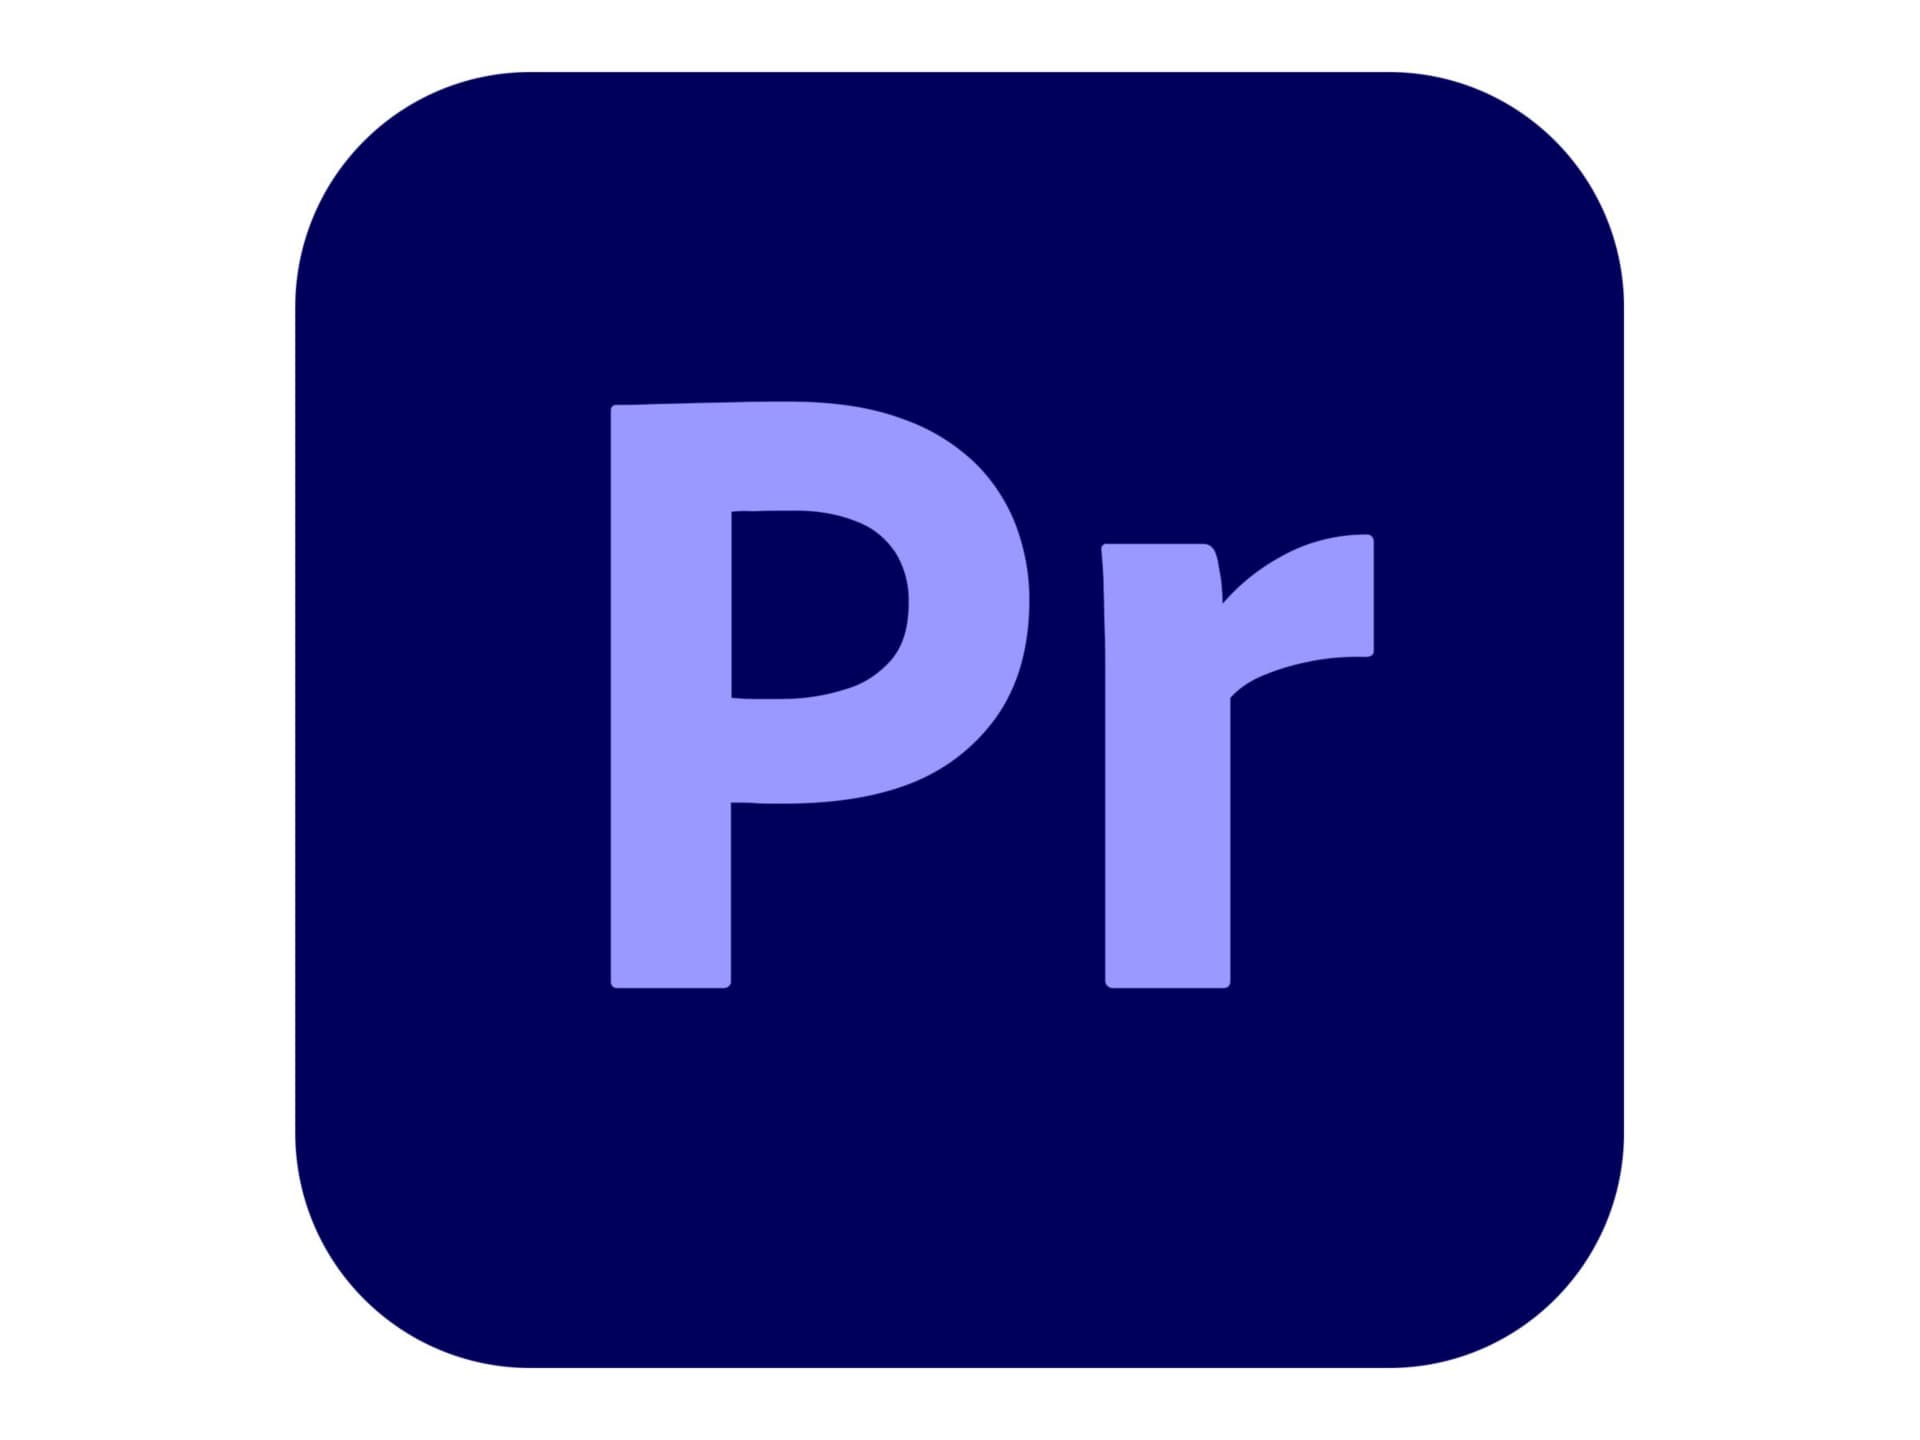 Adobe Premiere Pro CC for teams - Subscription New (2 months) - 1 named user